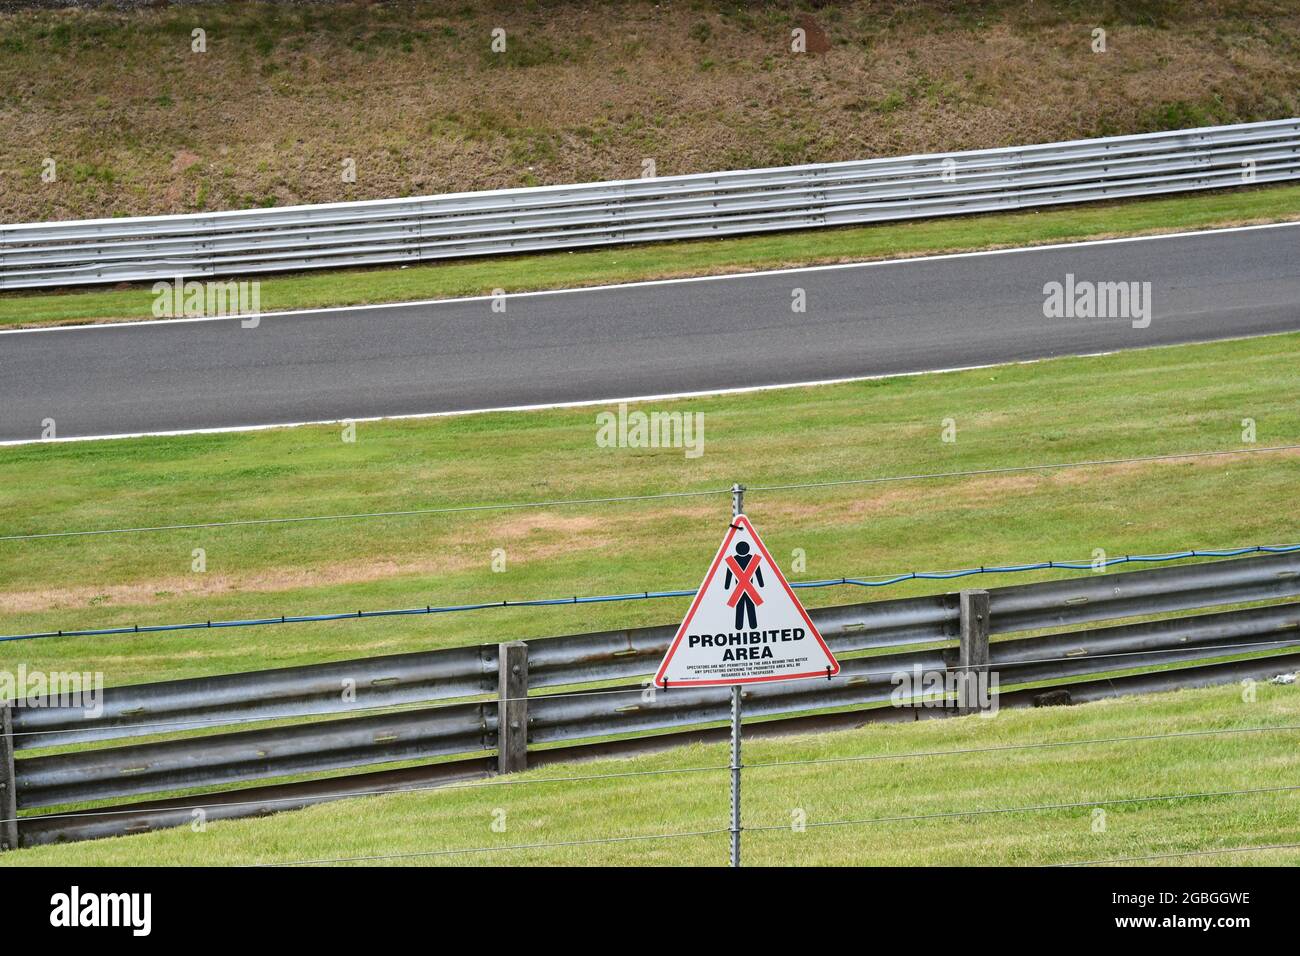 Prohibited area warning sign on a security fence over a racing circuit Stock Photo